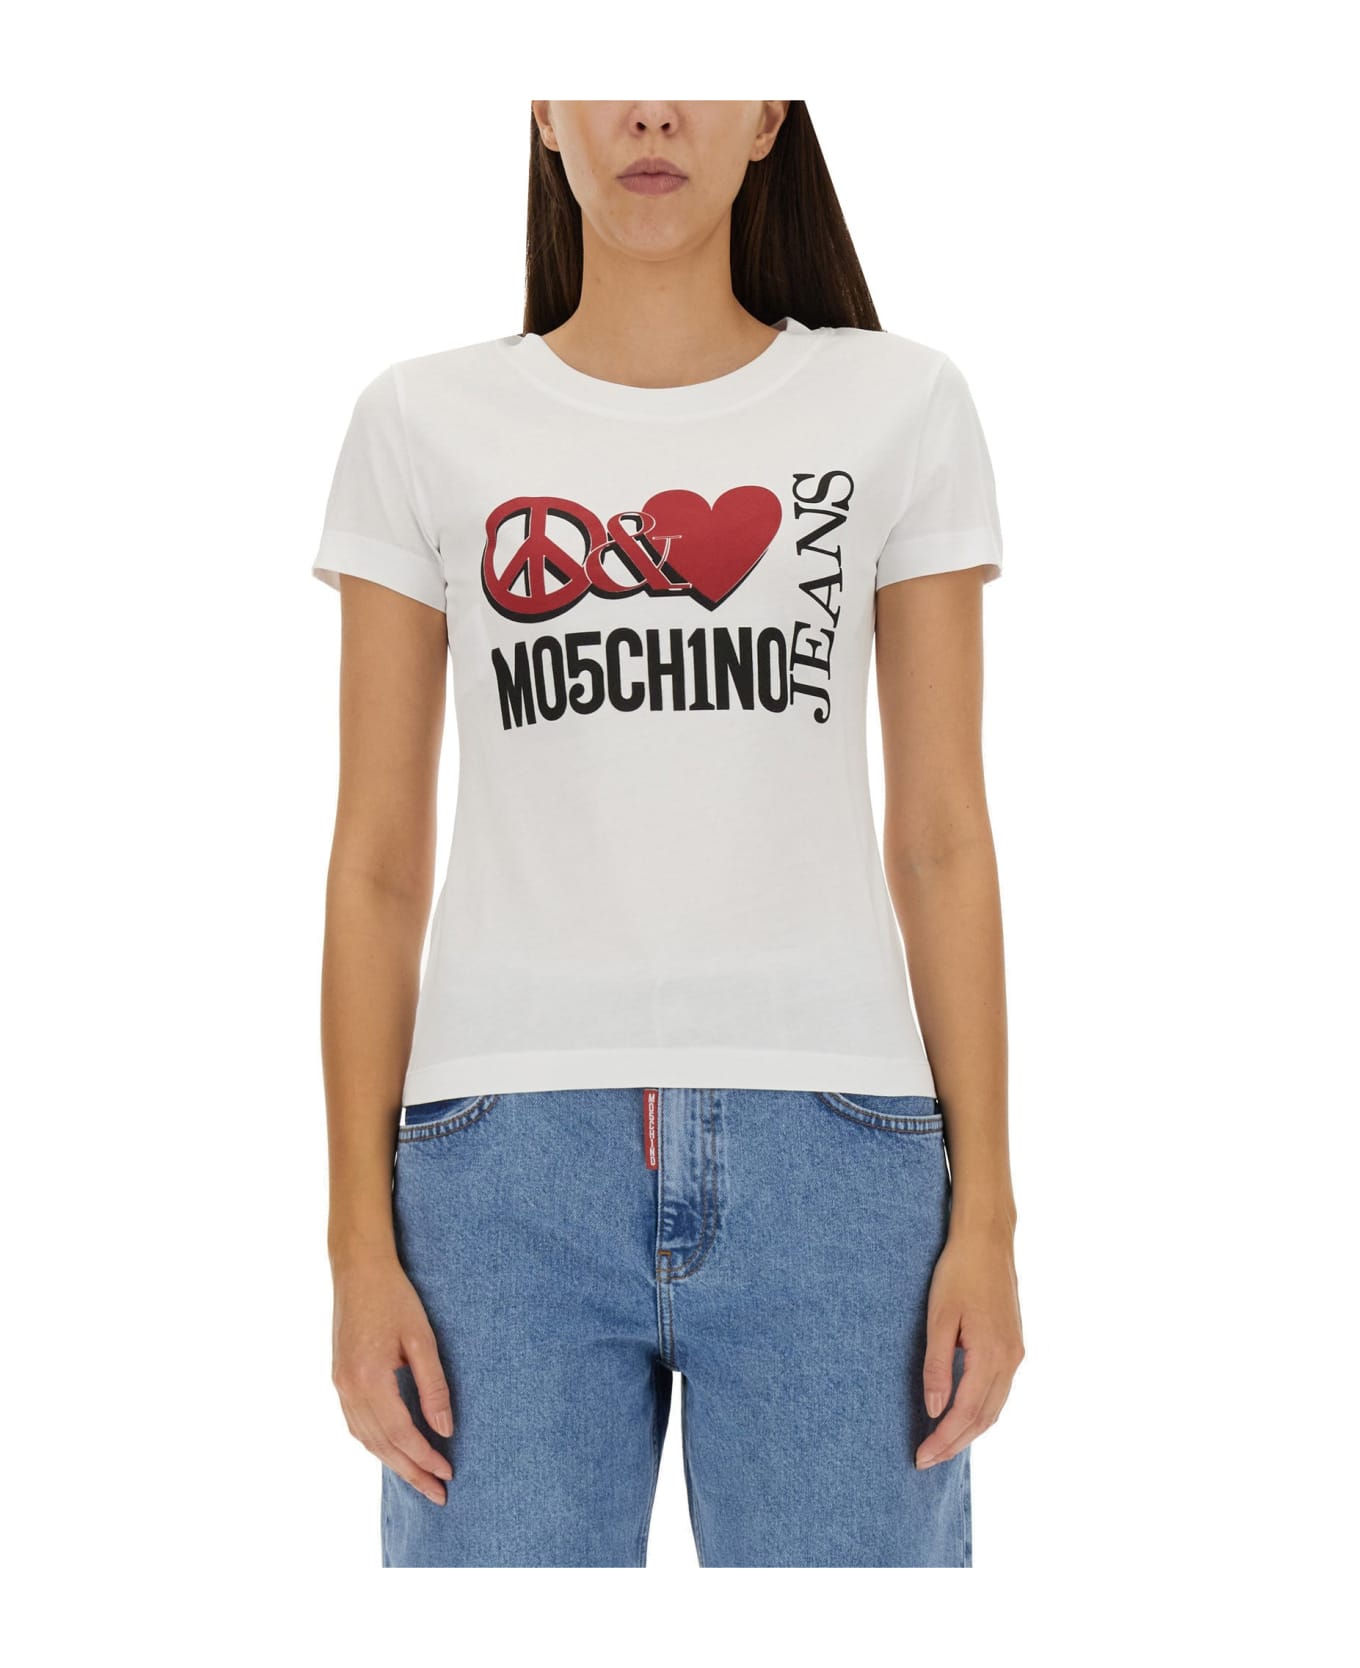 M05CH1N0 Jeans Peace & Love T-shirt - WHITE/RED